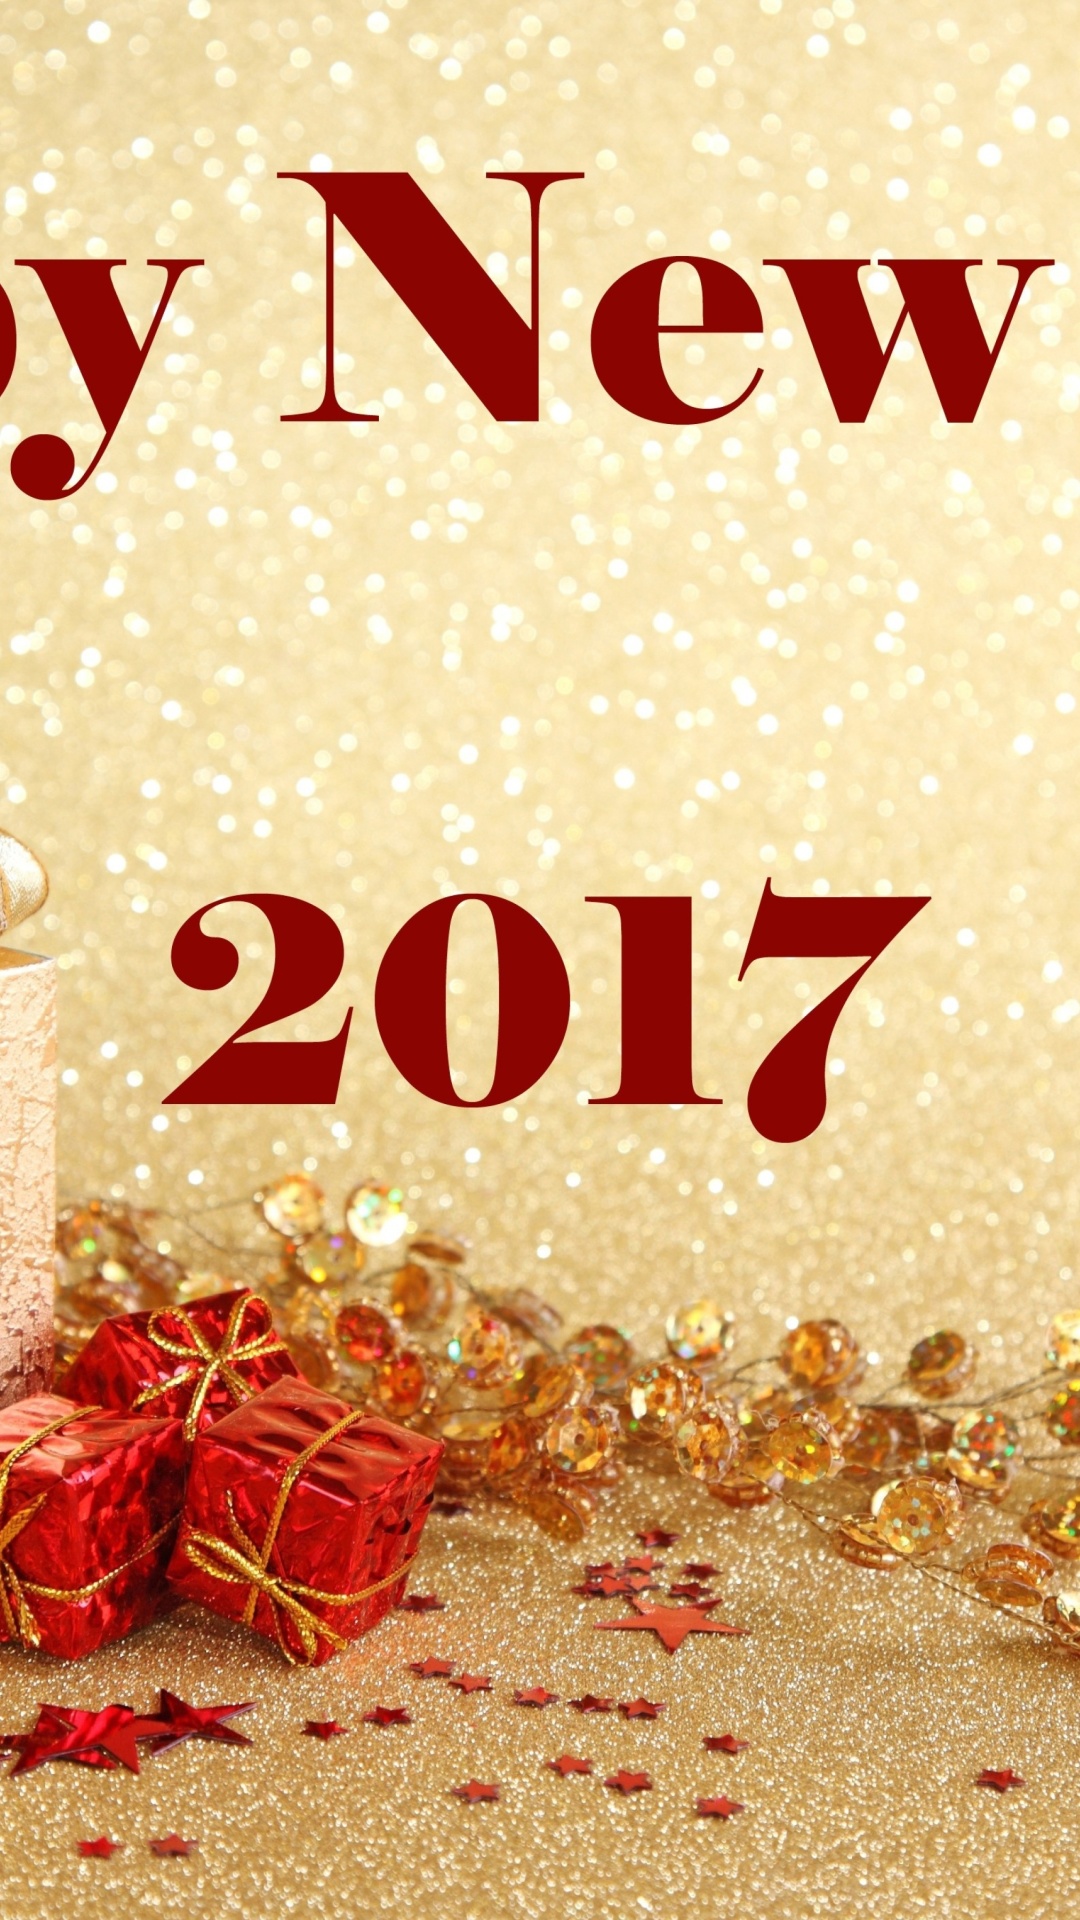 Happy New Year 2017 with Gifts wallpaper 1080x1920